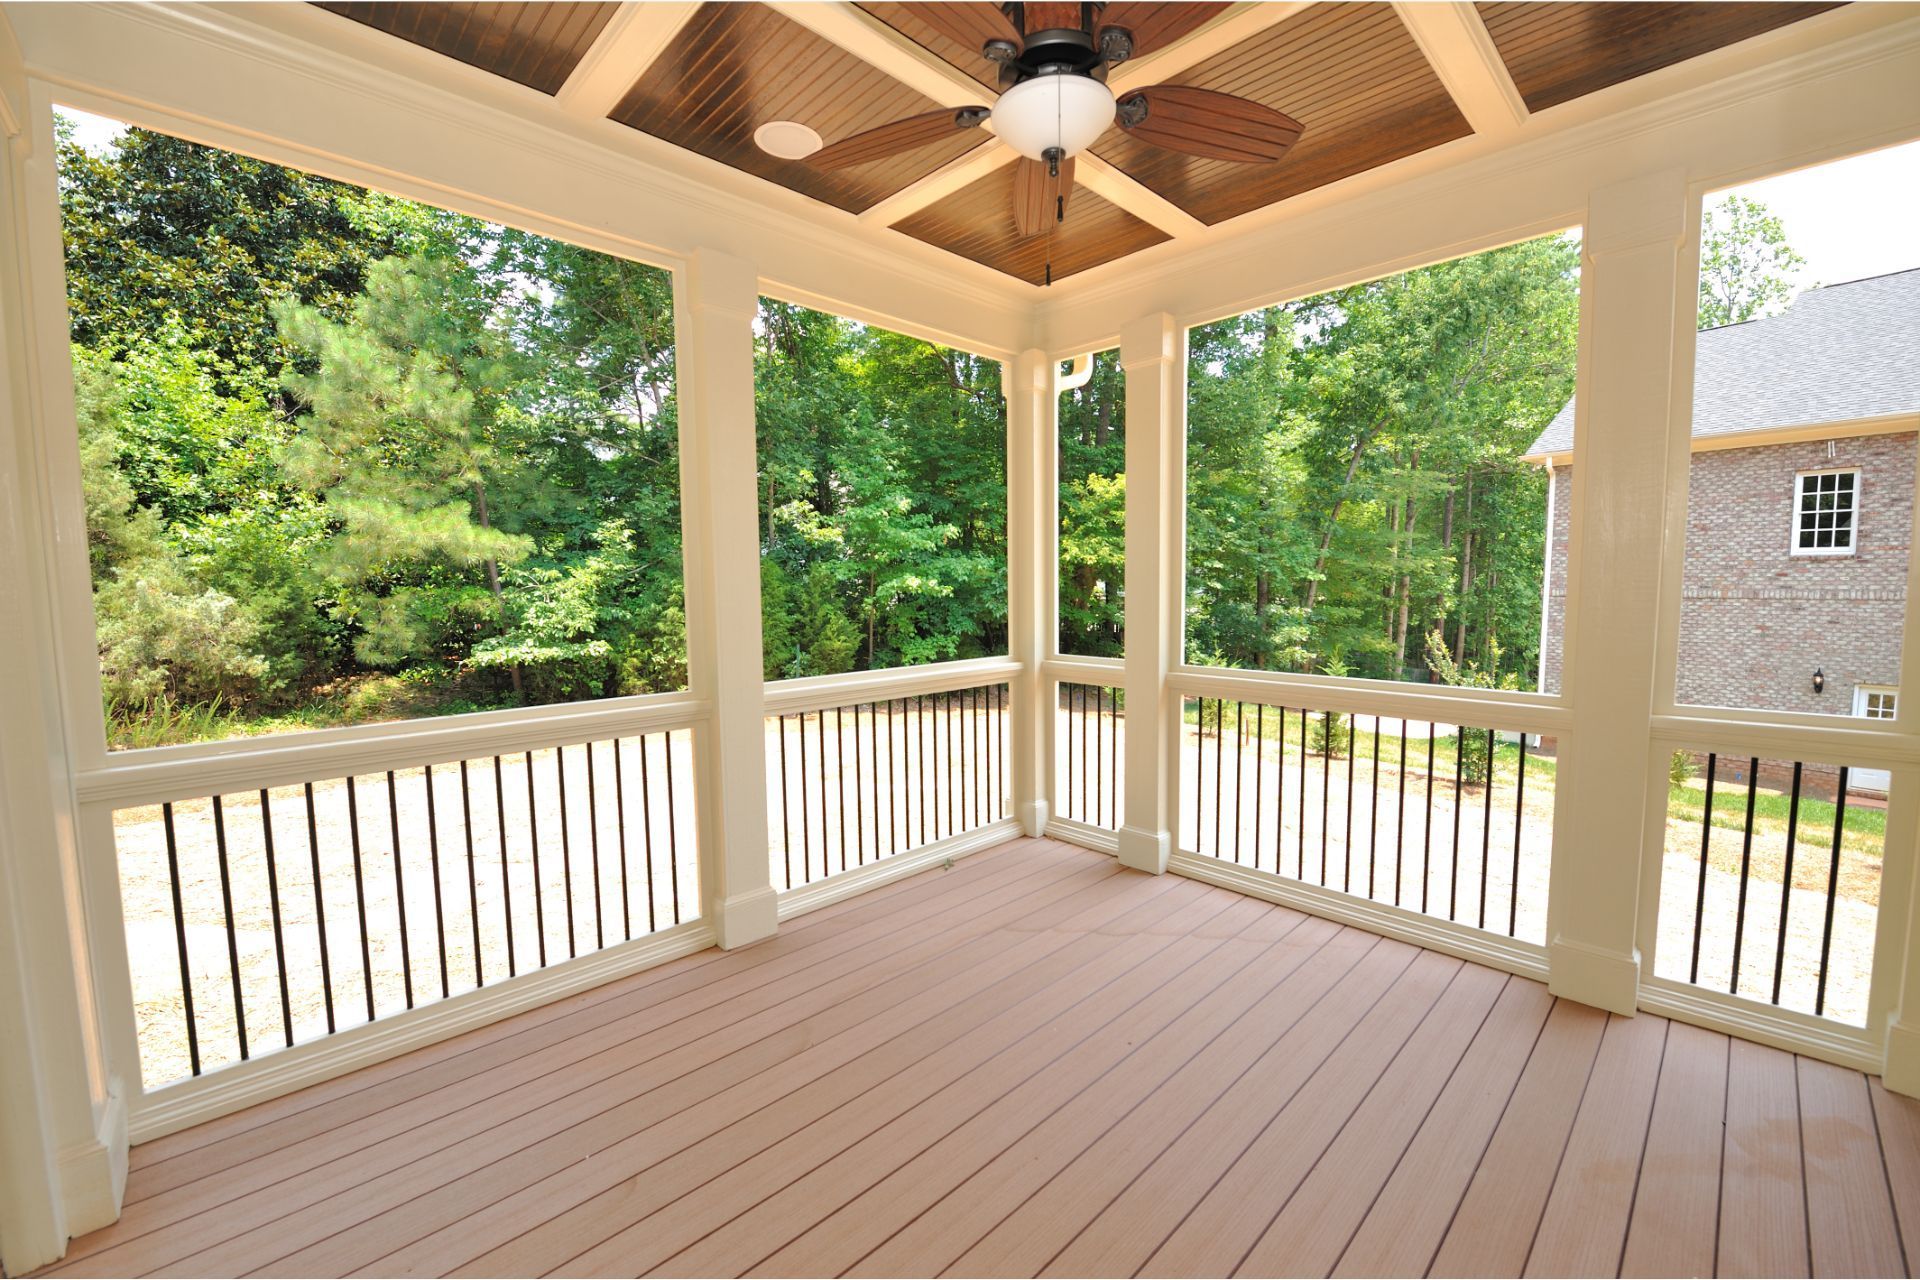 Screened porch with wood floor, fan, and forest view.